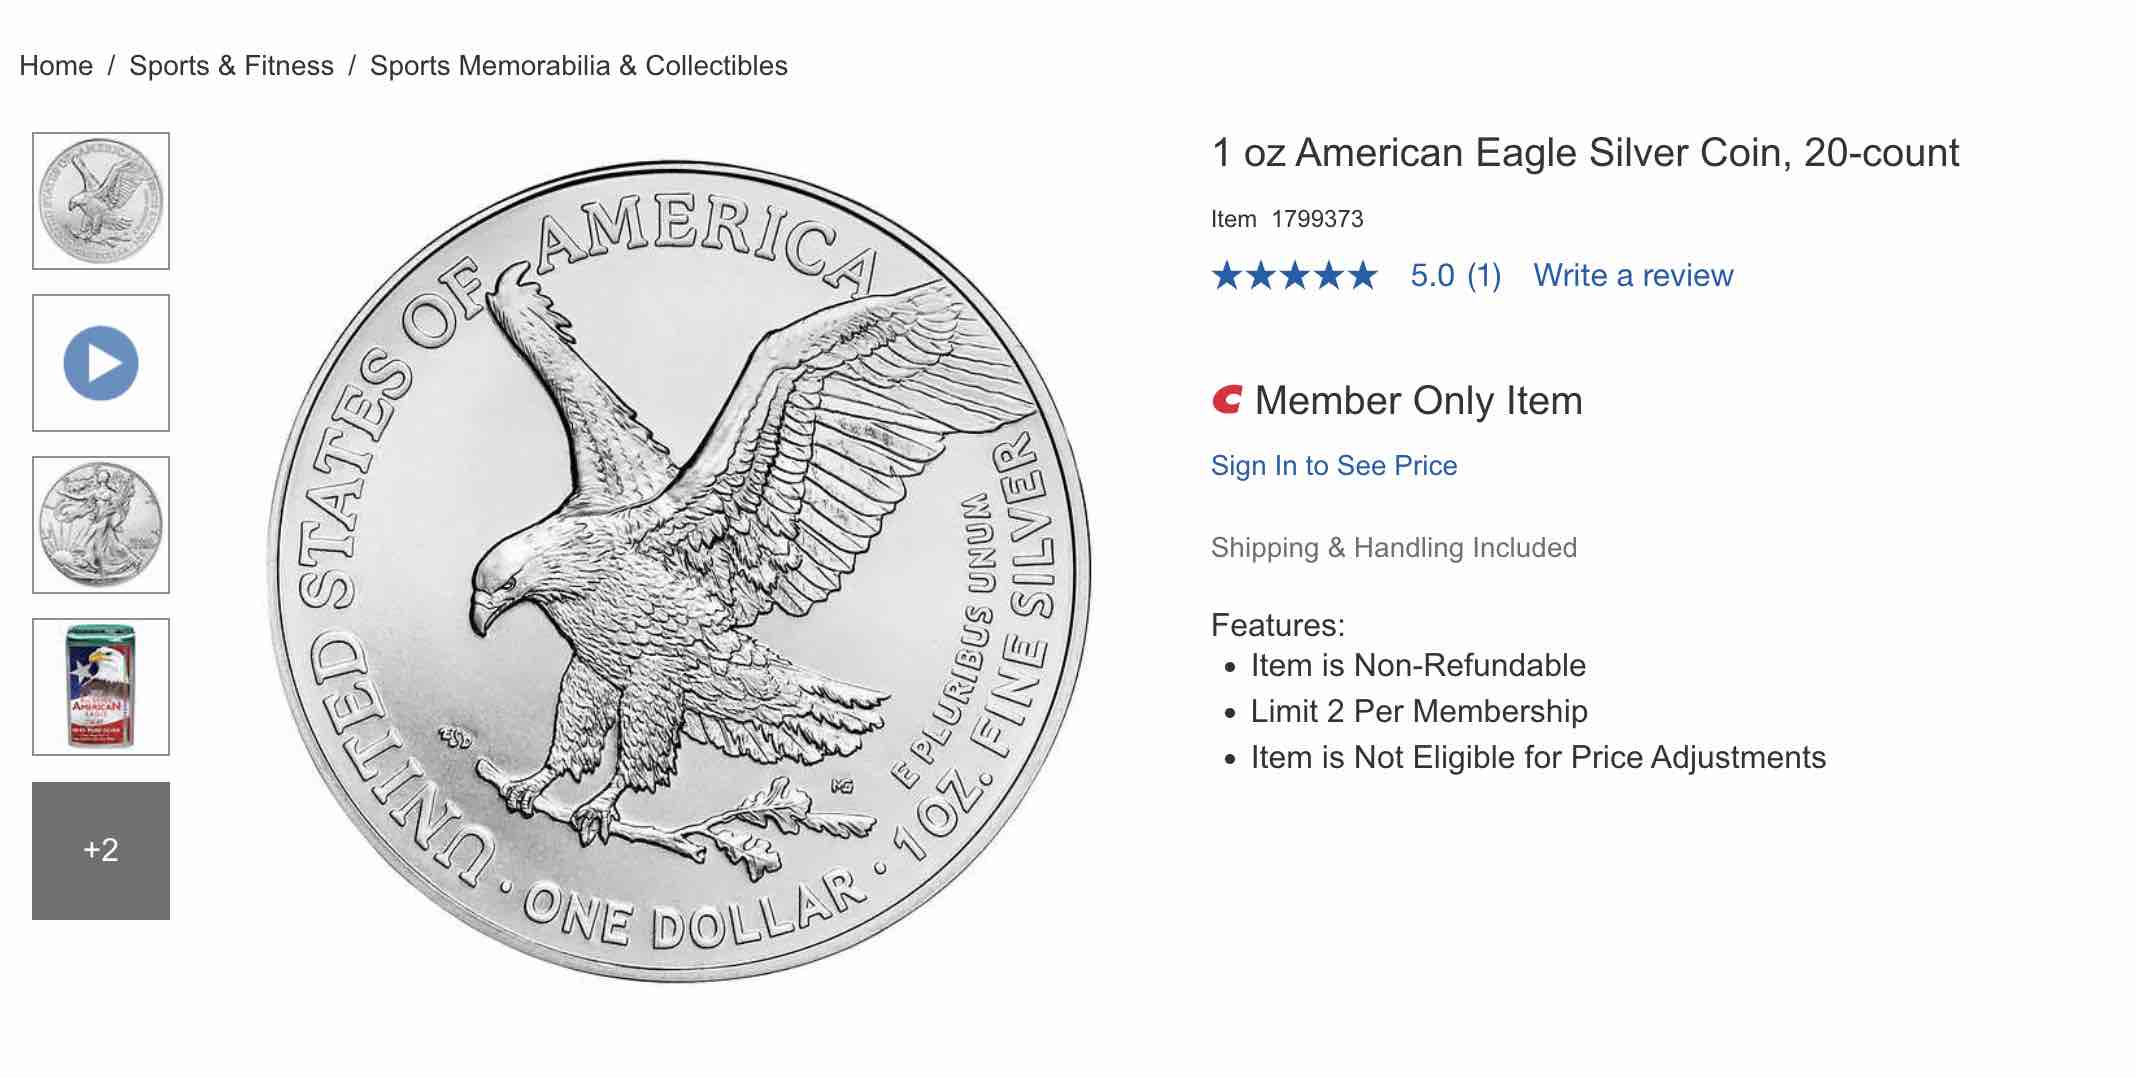 Silver Eagles Product Page at Costco.com